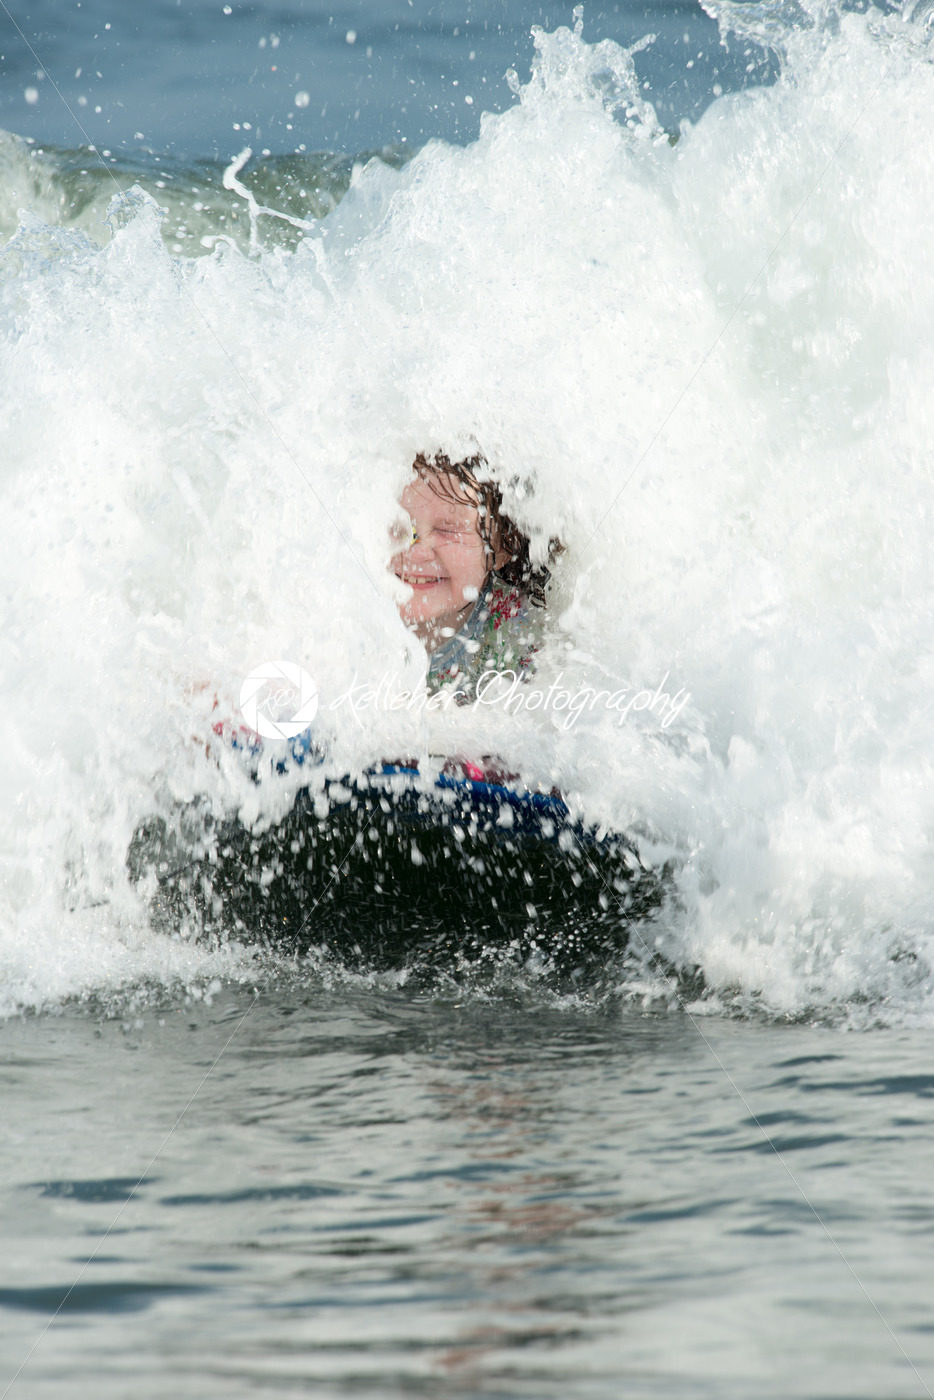 Young Girl surfing the waves on a boogy board - Kelleher Photography Store